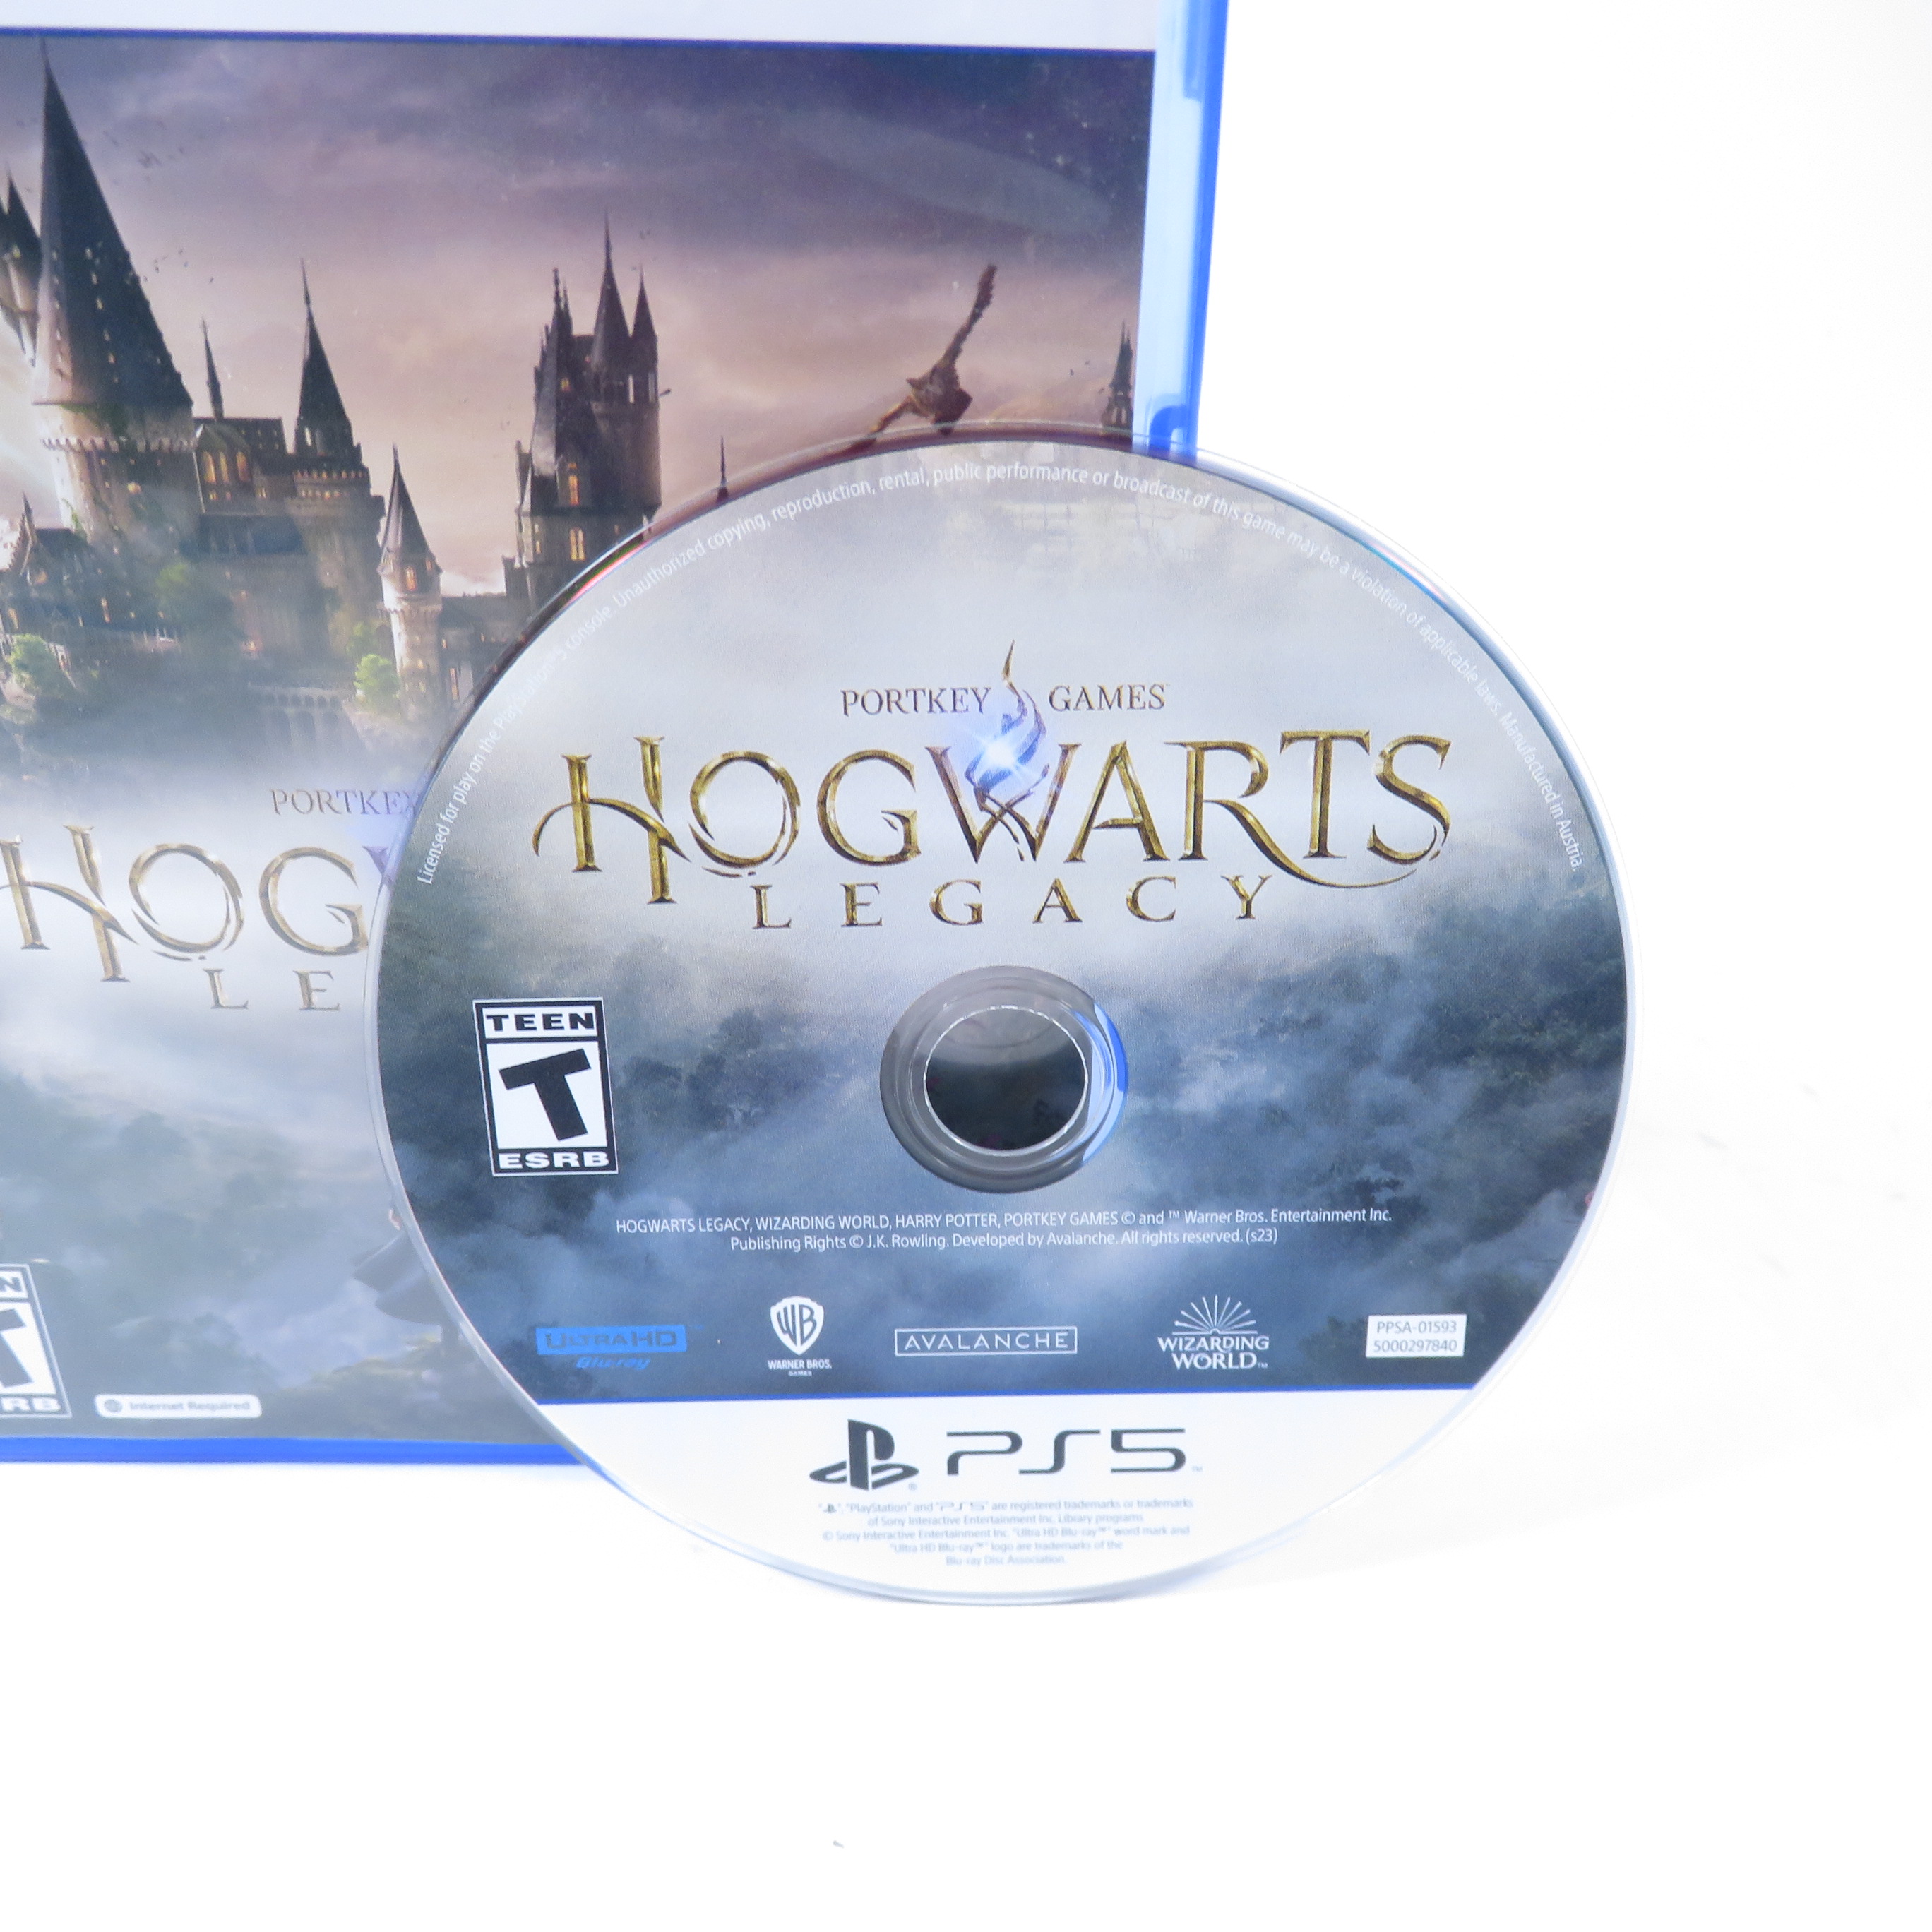 Hogwarts Legacy Video Game for PlayStation 5 the Sony